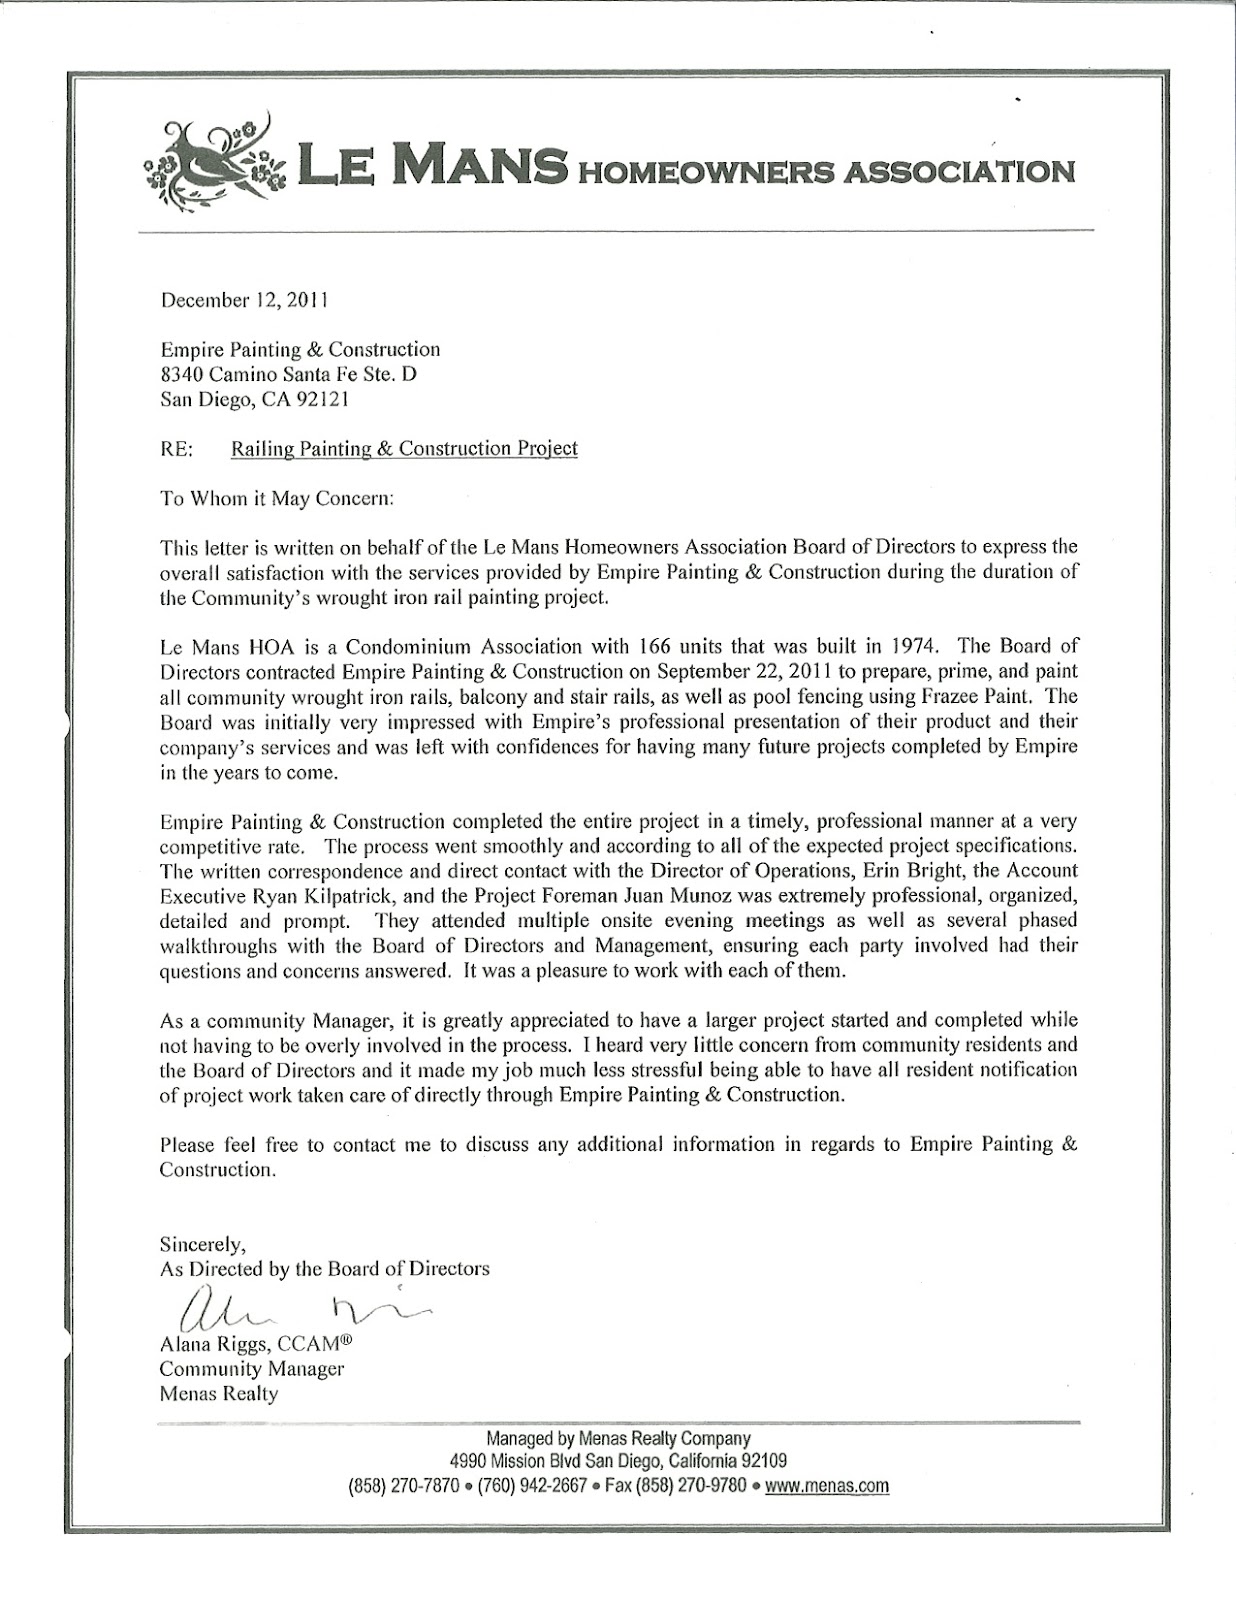 empireworks-reviews-and-resources-le-mans-hoa-reference-letter